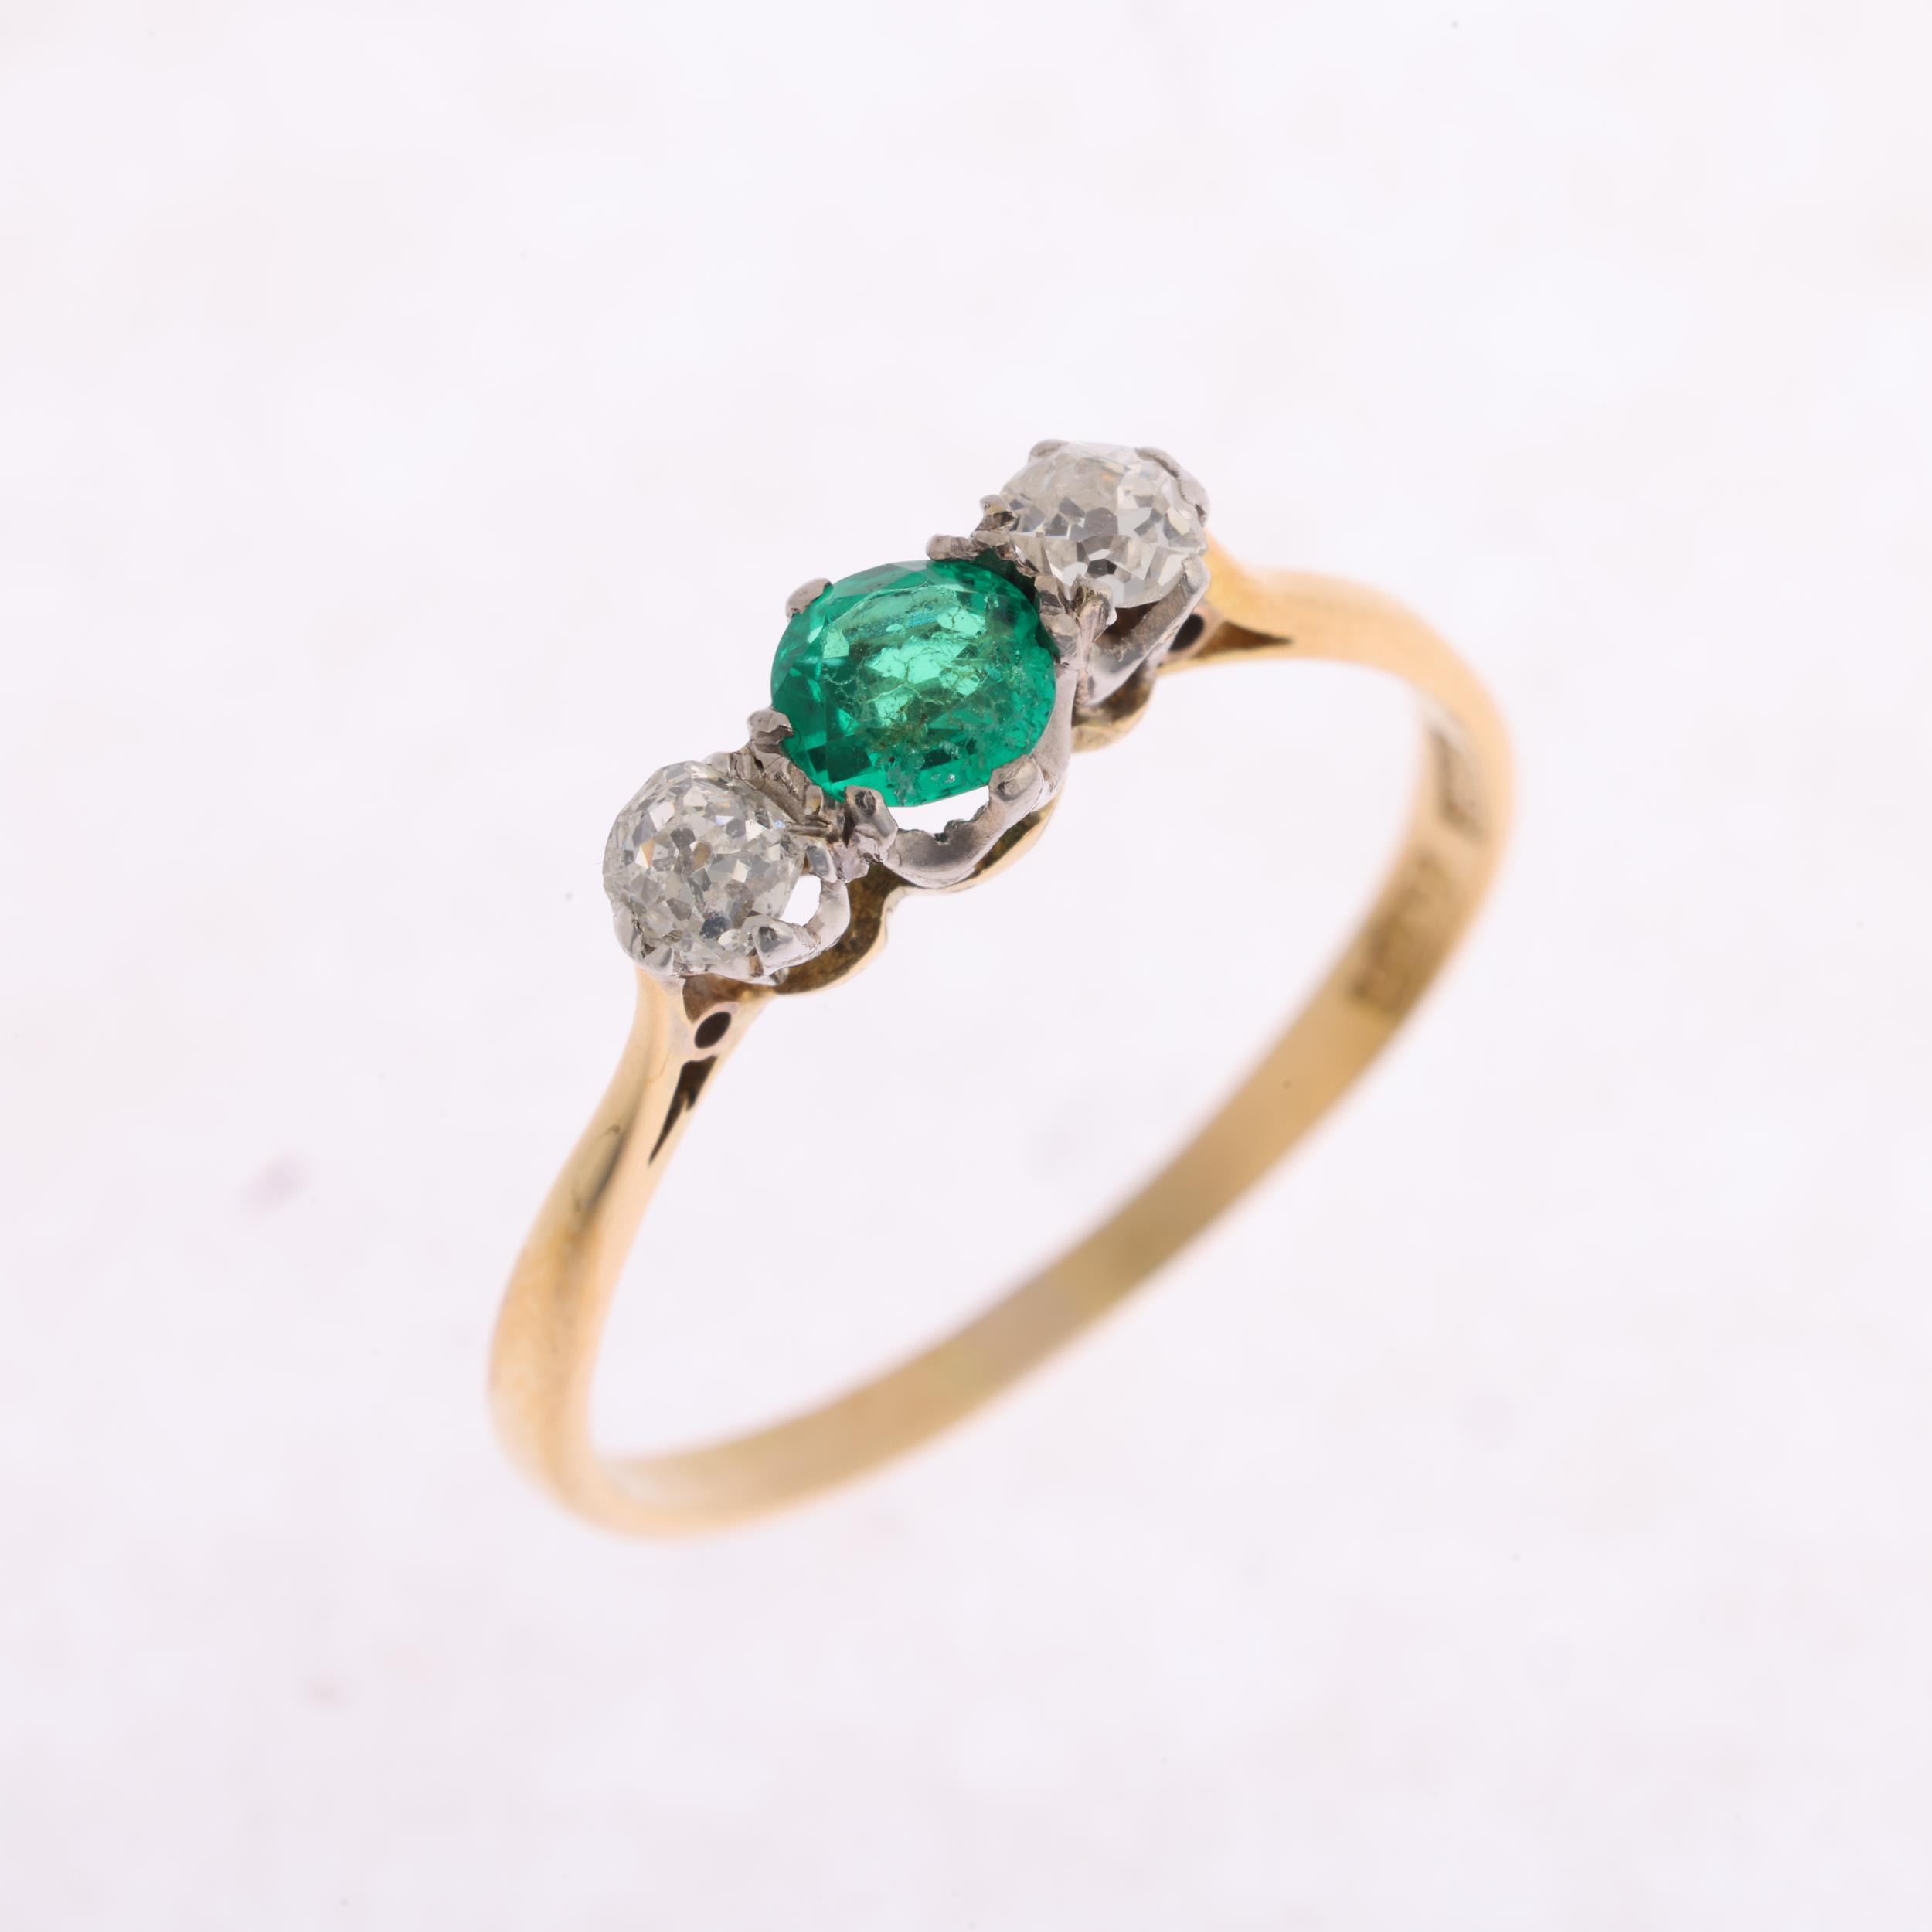 An Art Deco 18ct gold three stone emerald and diamond ring, platinum-topped set with round-cut - Image 2 of 4